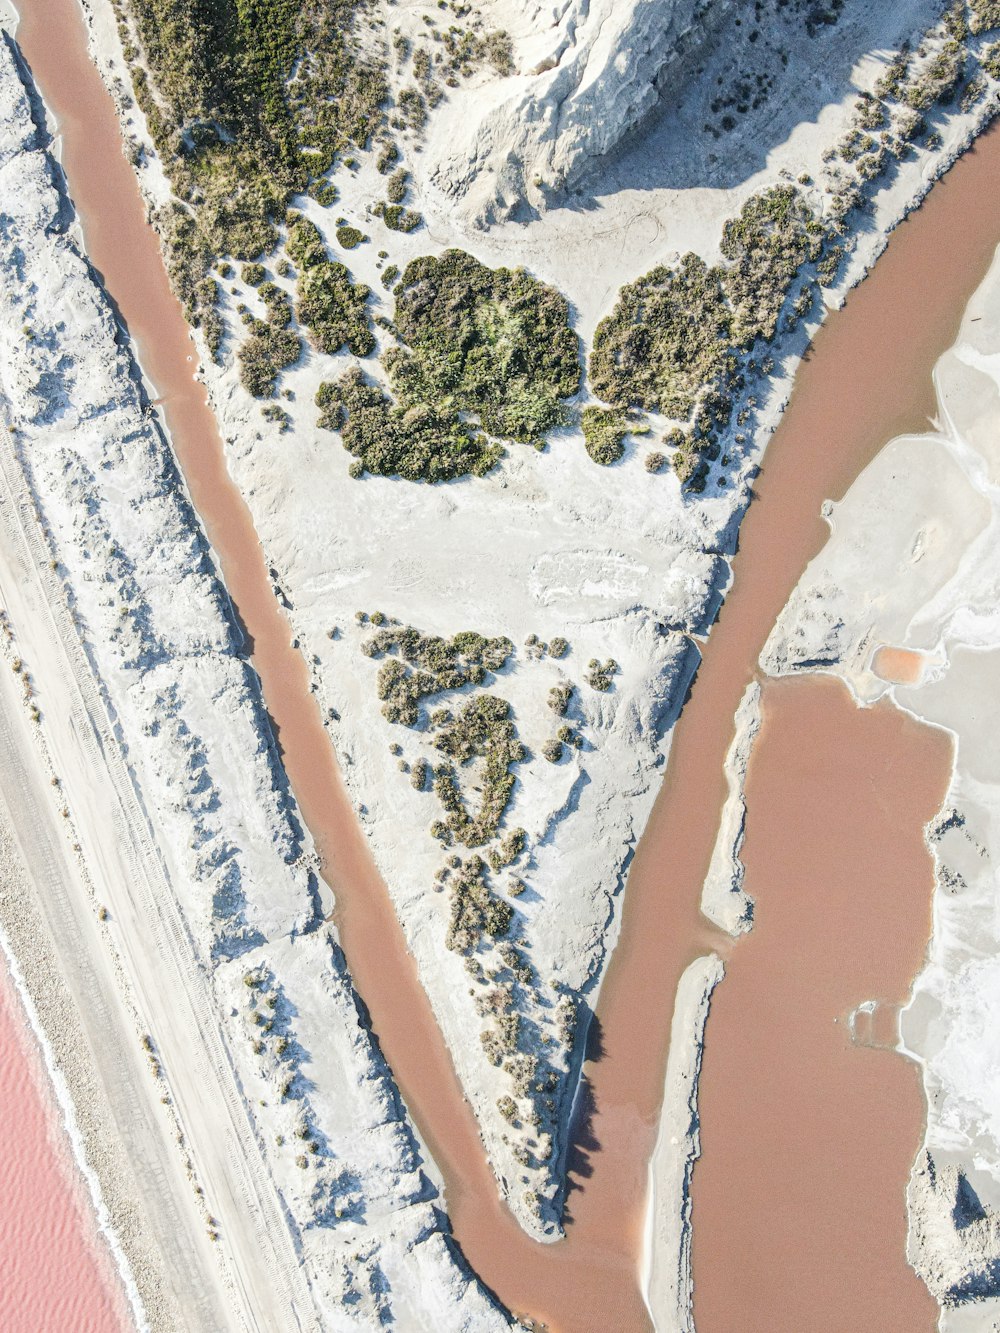 aerial view of body of water during daytime